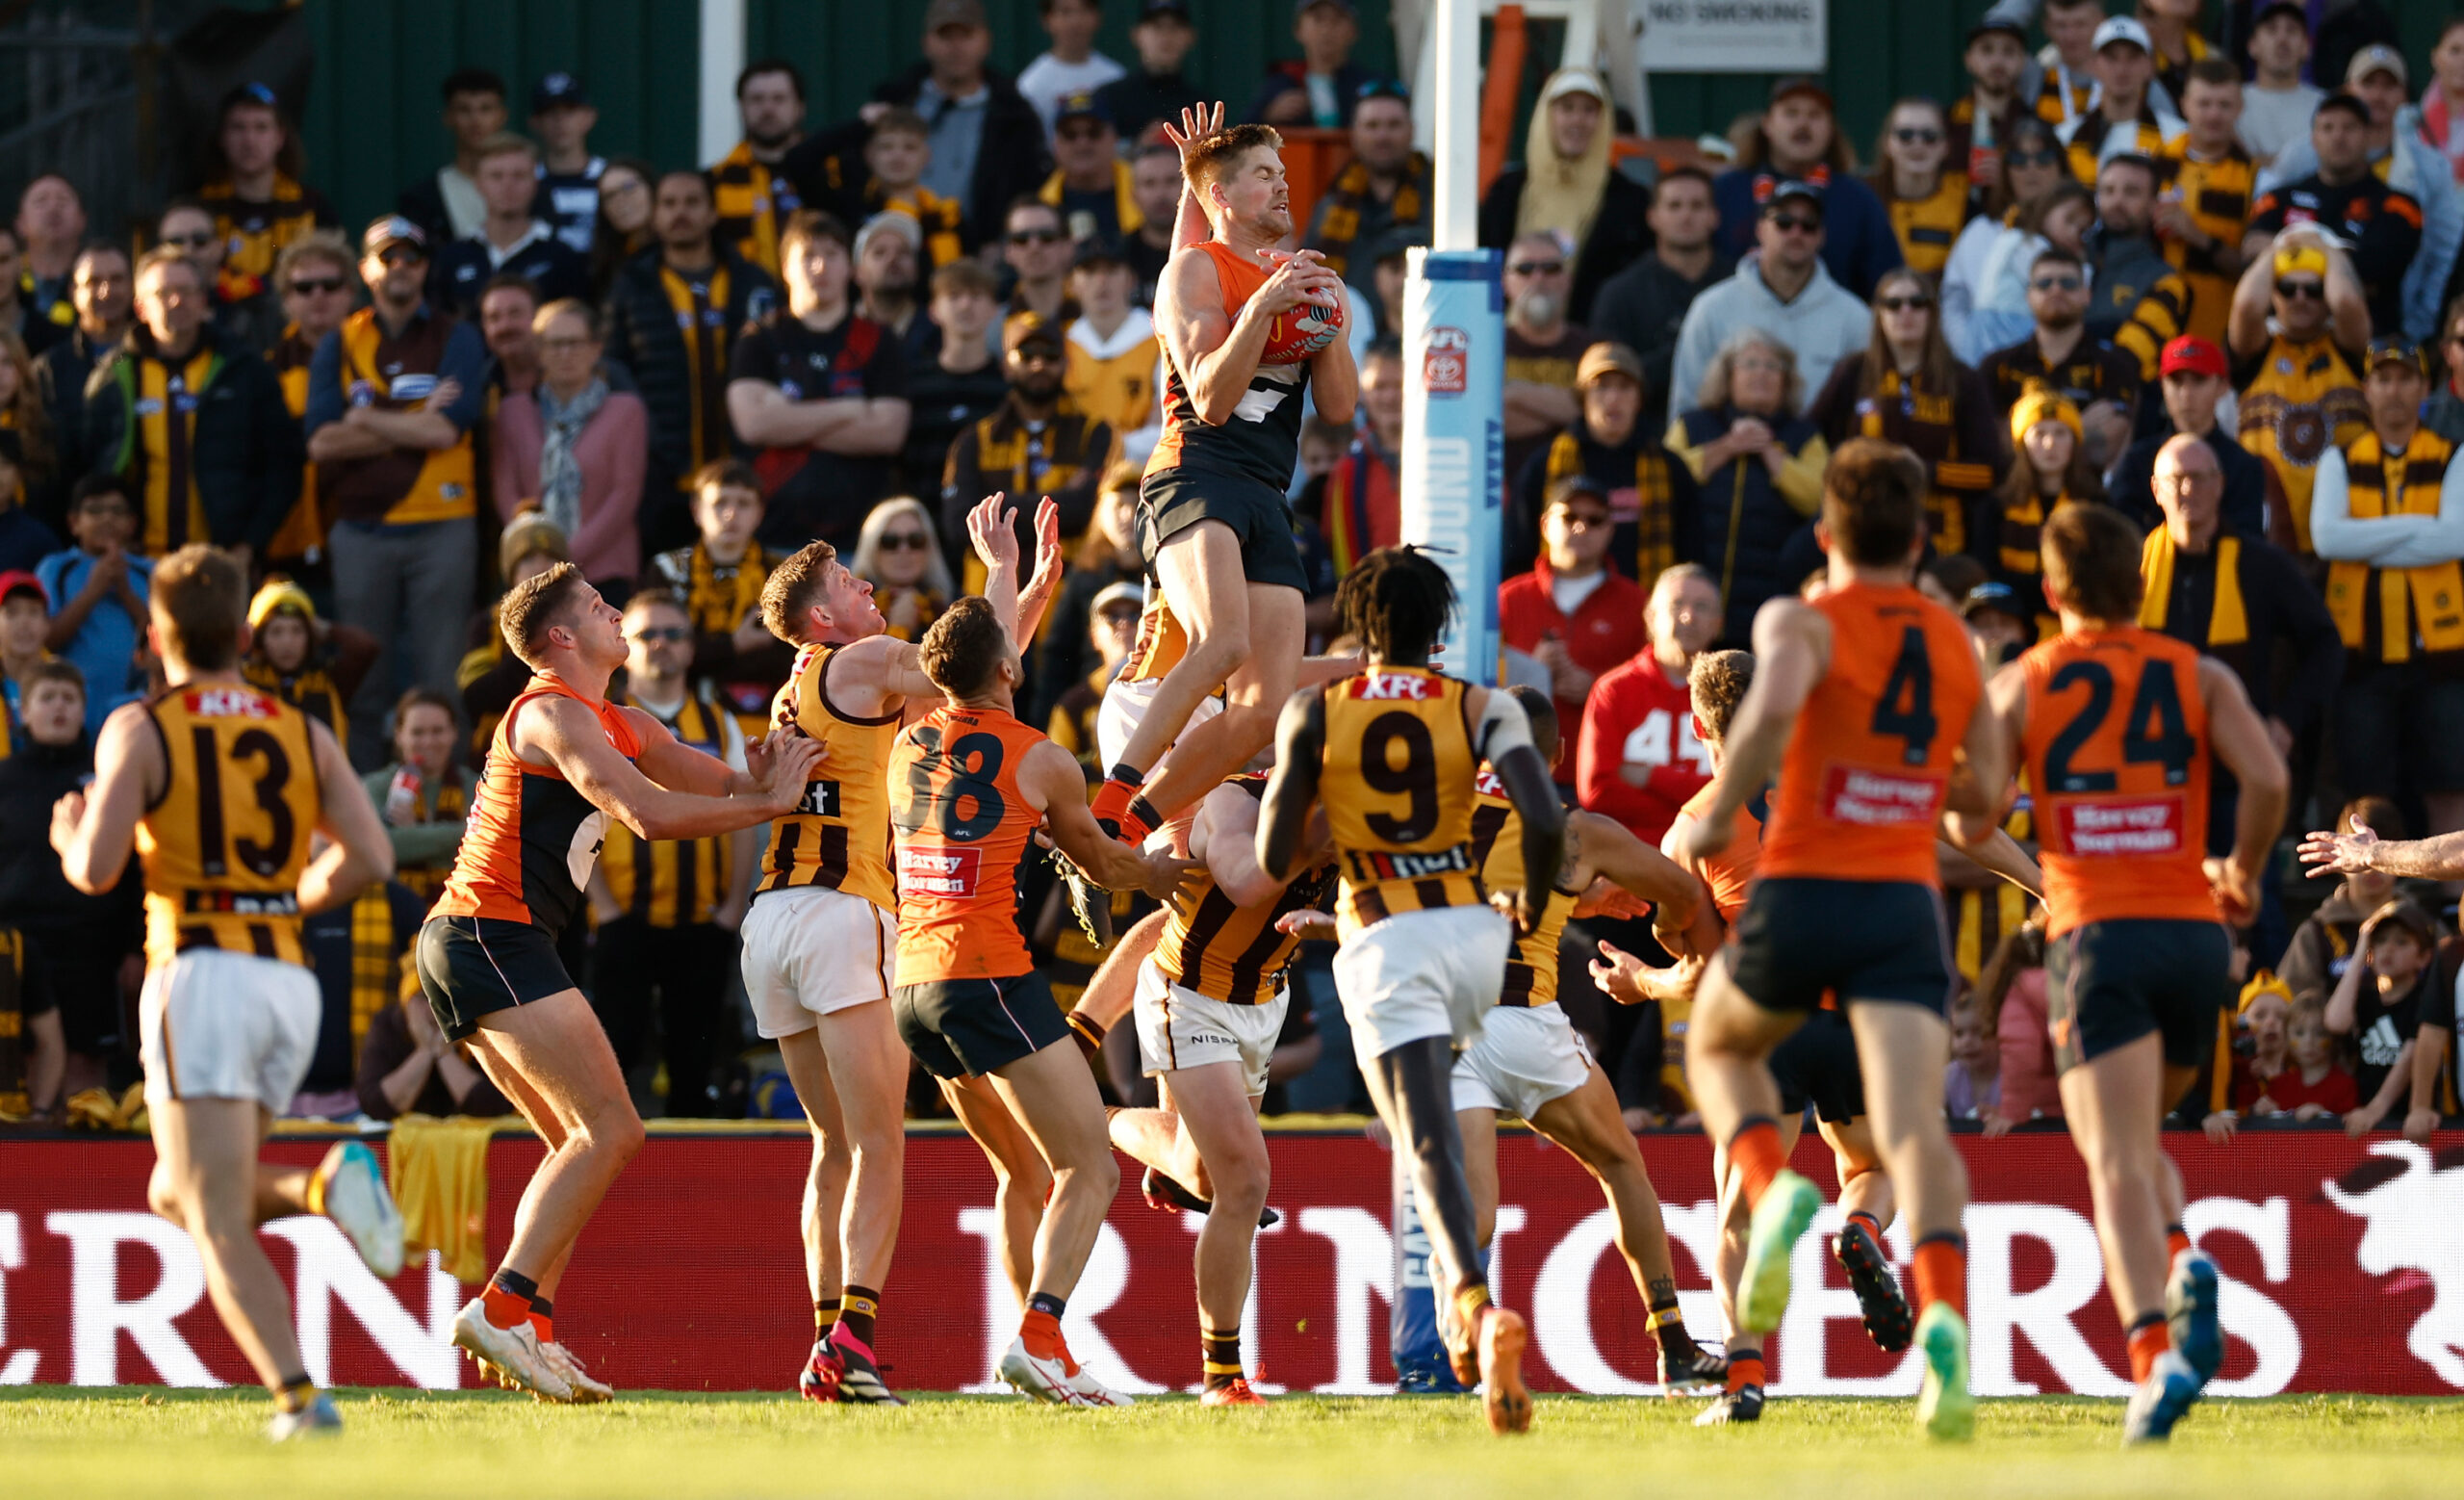 Why SF Giants Fans Should Support This Australian Football Team